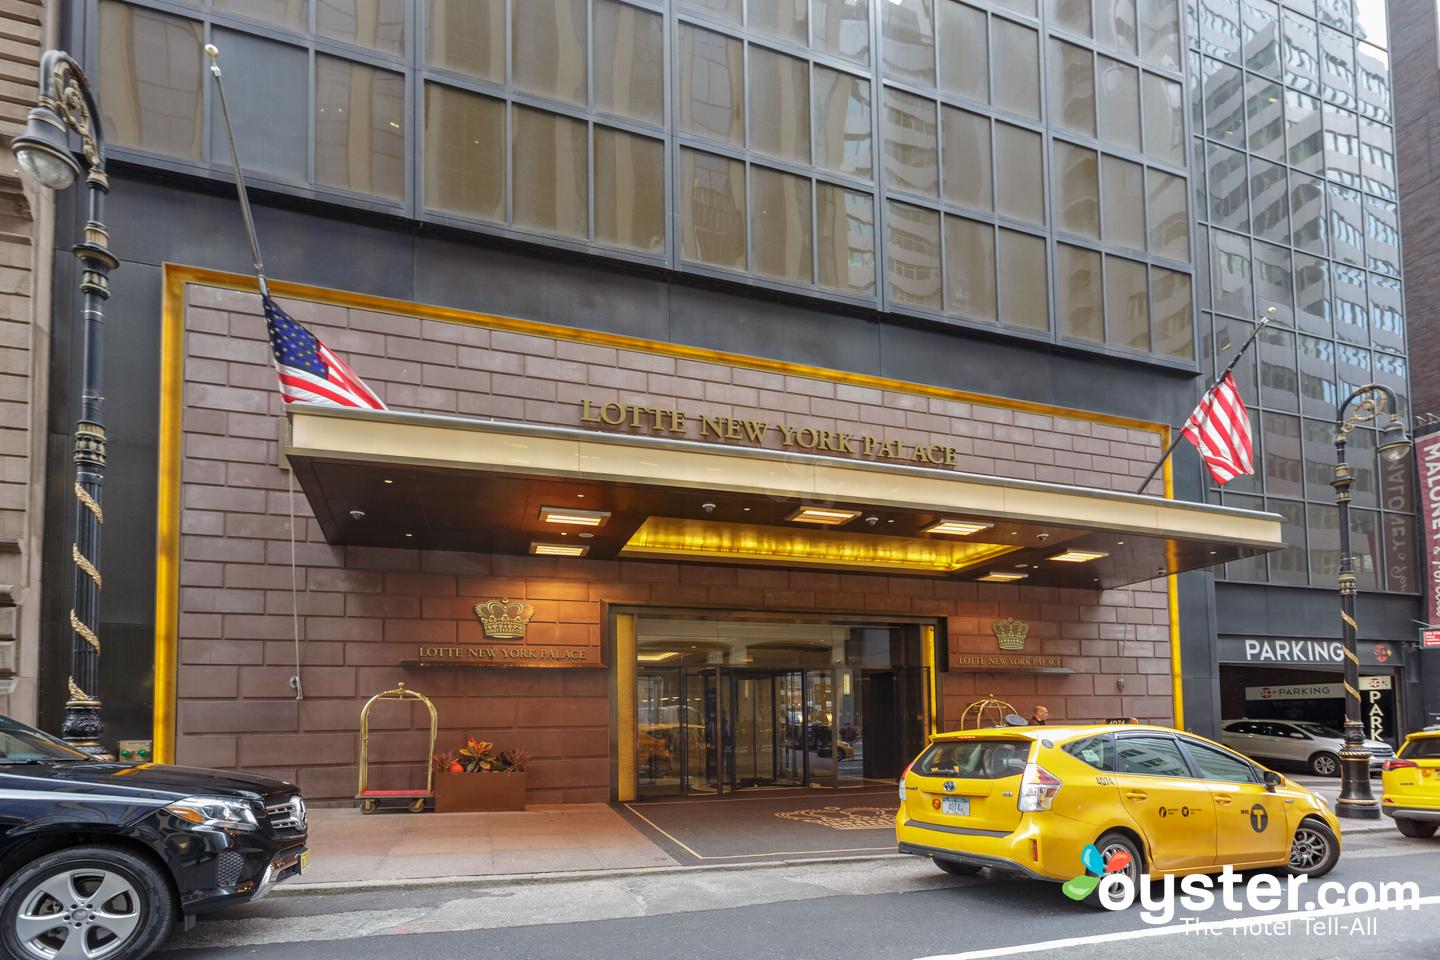 Lotte New York Palace Review: What To REALLY Expect If You Stay